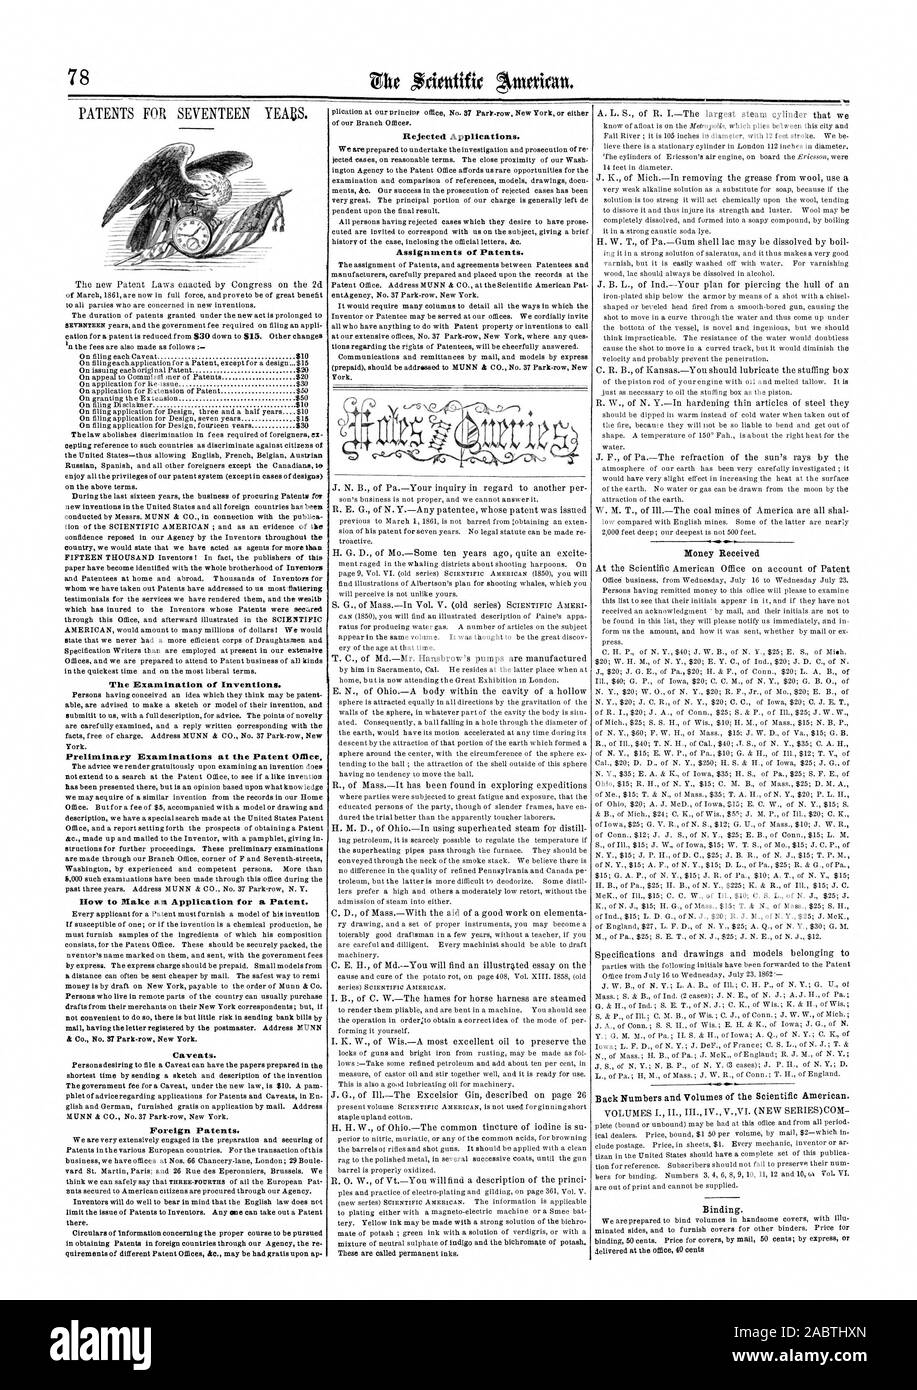 The Examination of Inventions. Preliminary Examinations at the Patent Office How to Make an Application for a Patent. Foreign Patents. Assignments of Patents., scientific american, 1862-08-02 Stock Photo